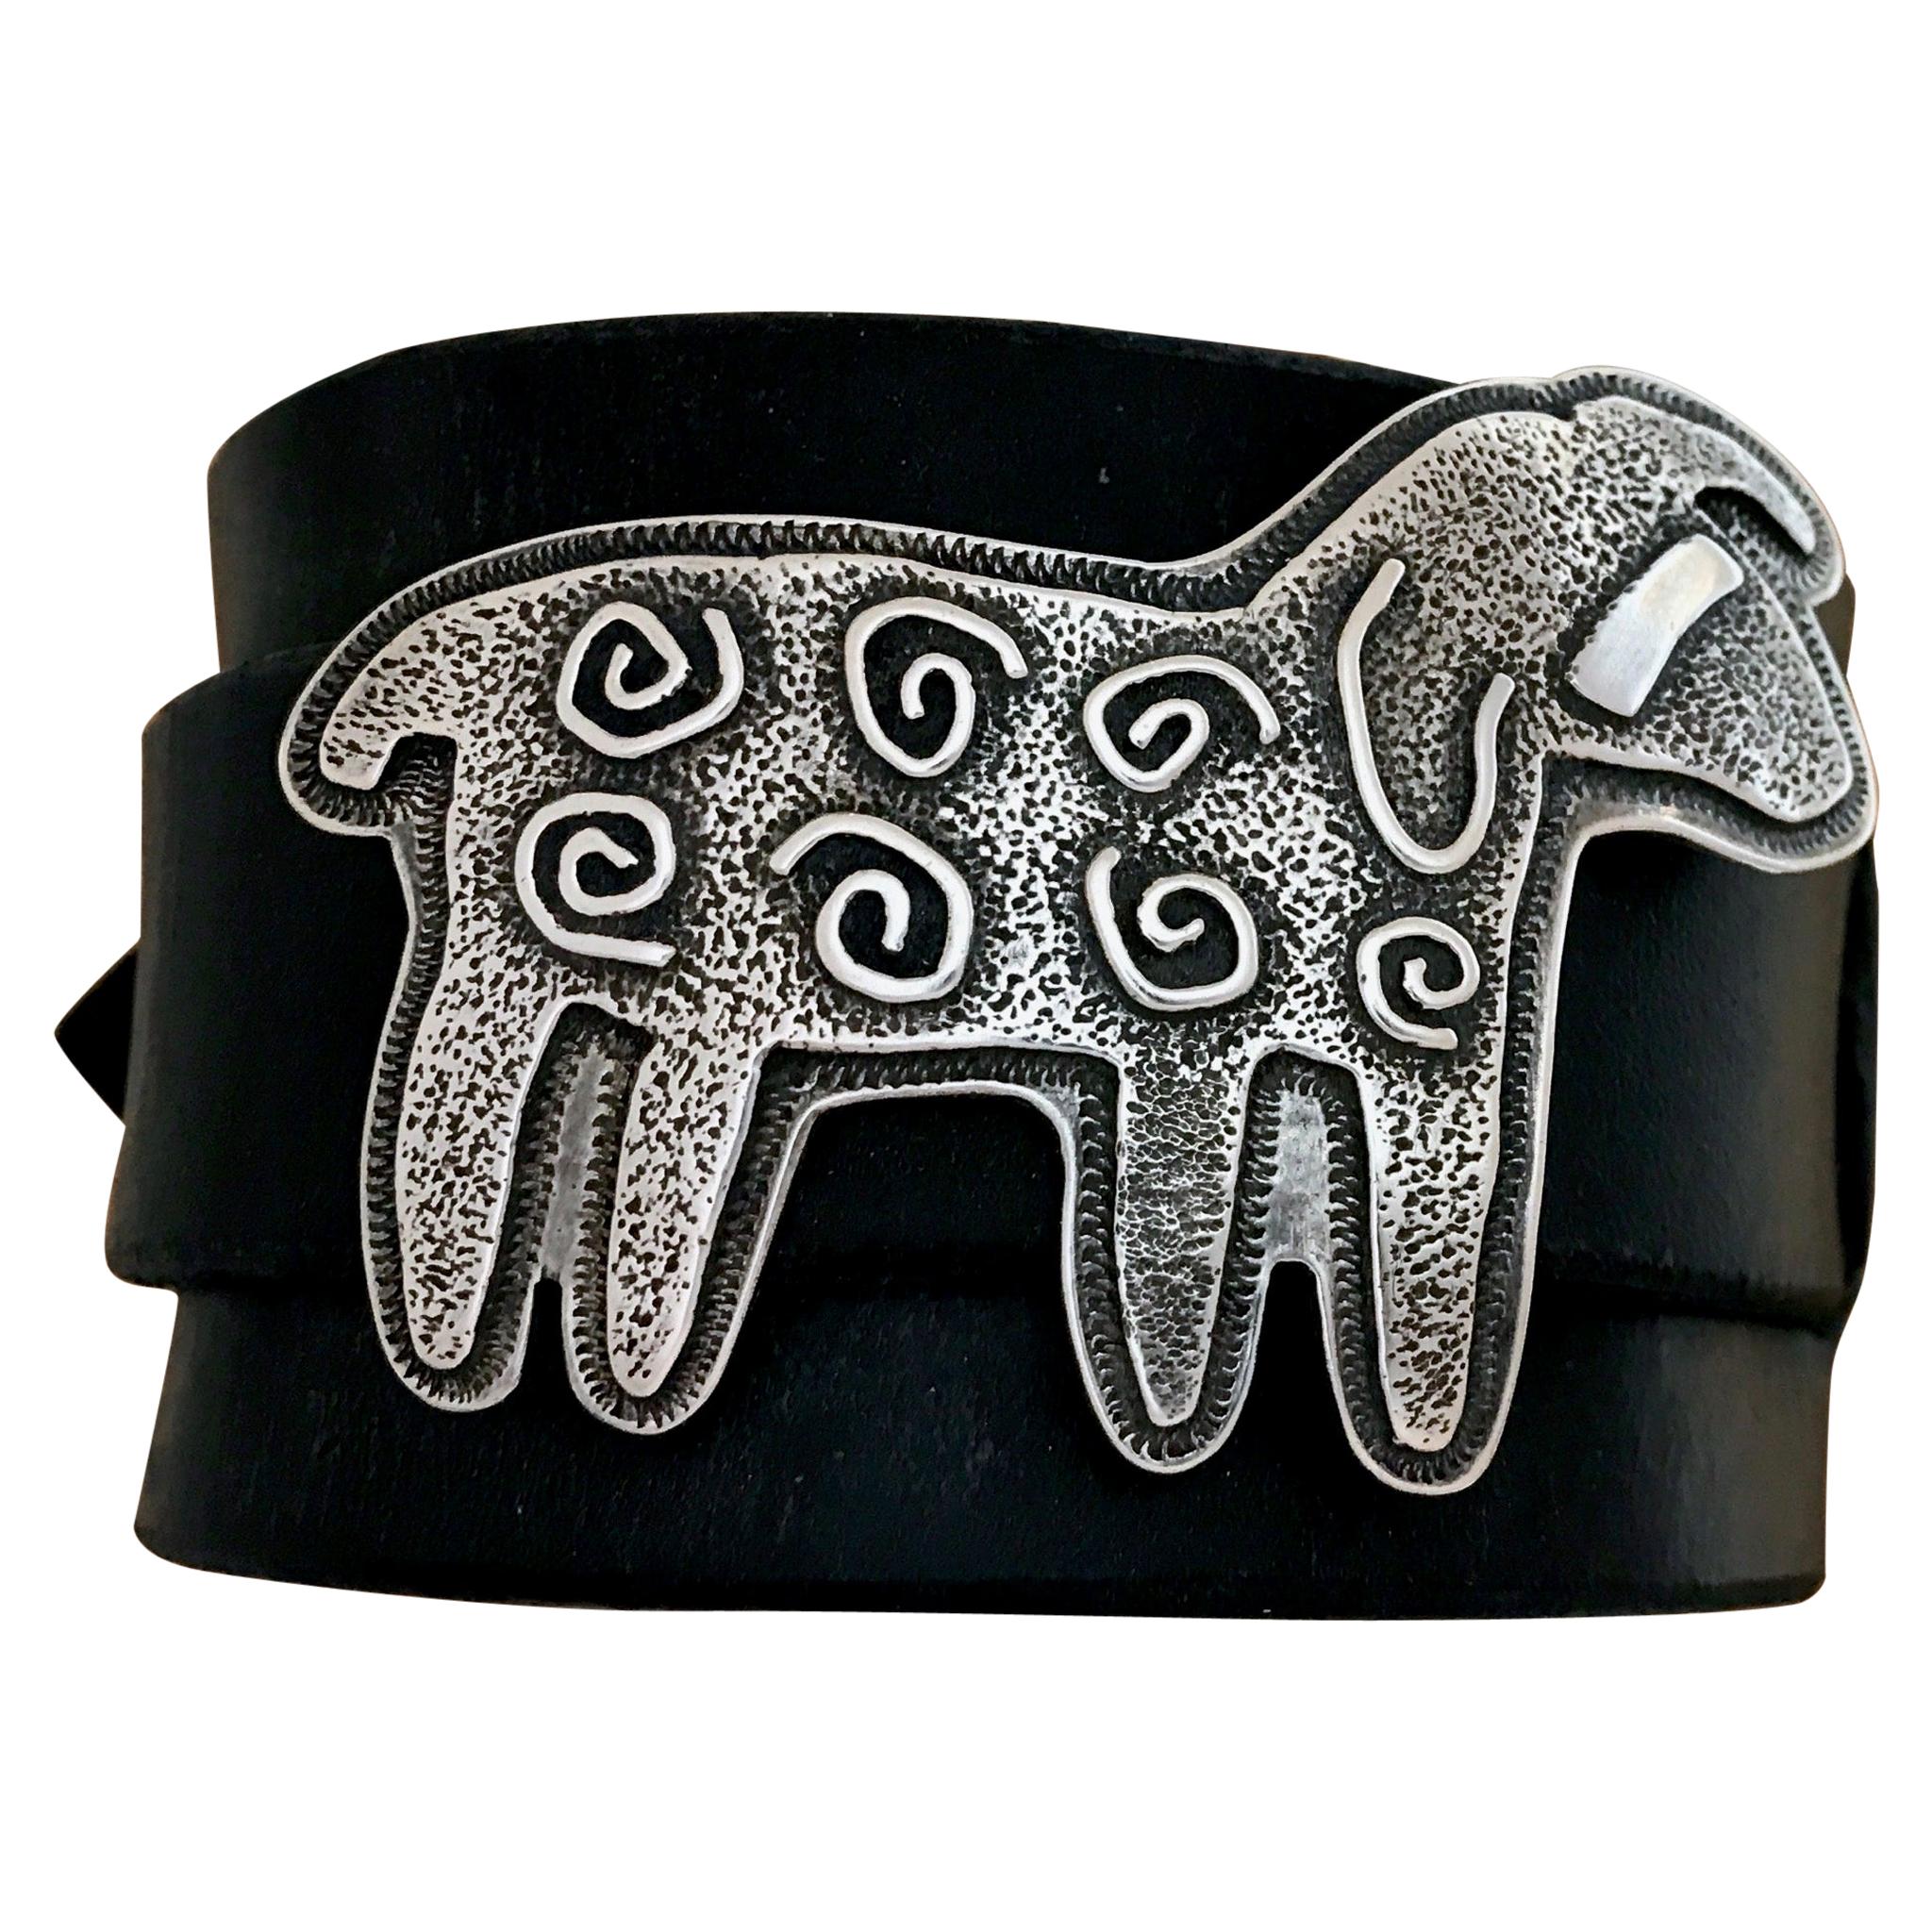 Curly Sheep leather cuff bracelet, cast sterling silver, leather adjustable cuff For Sale